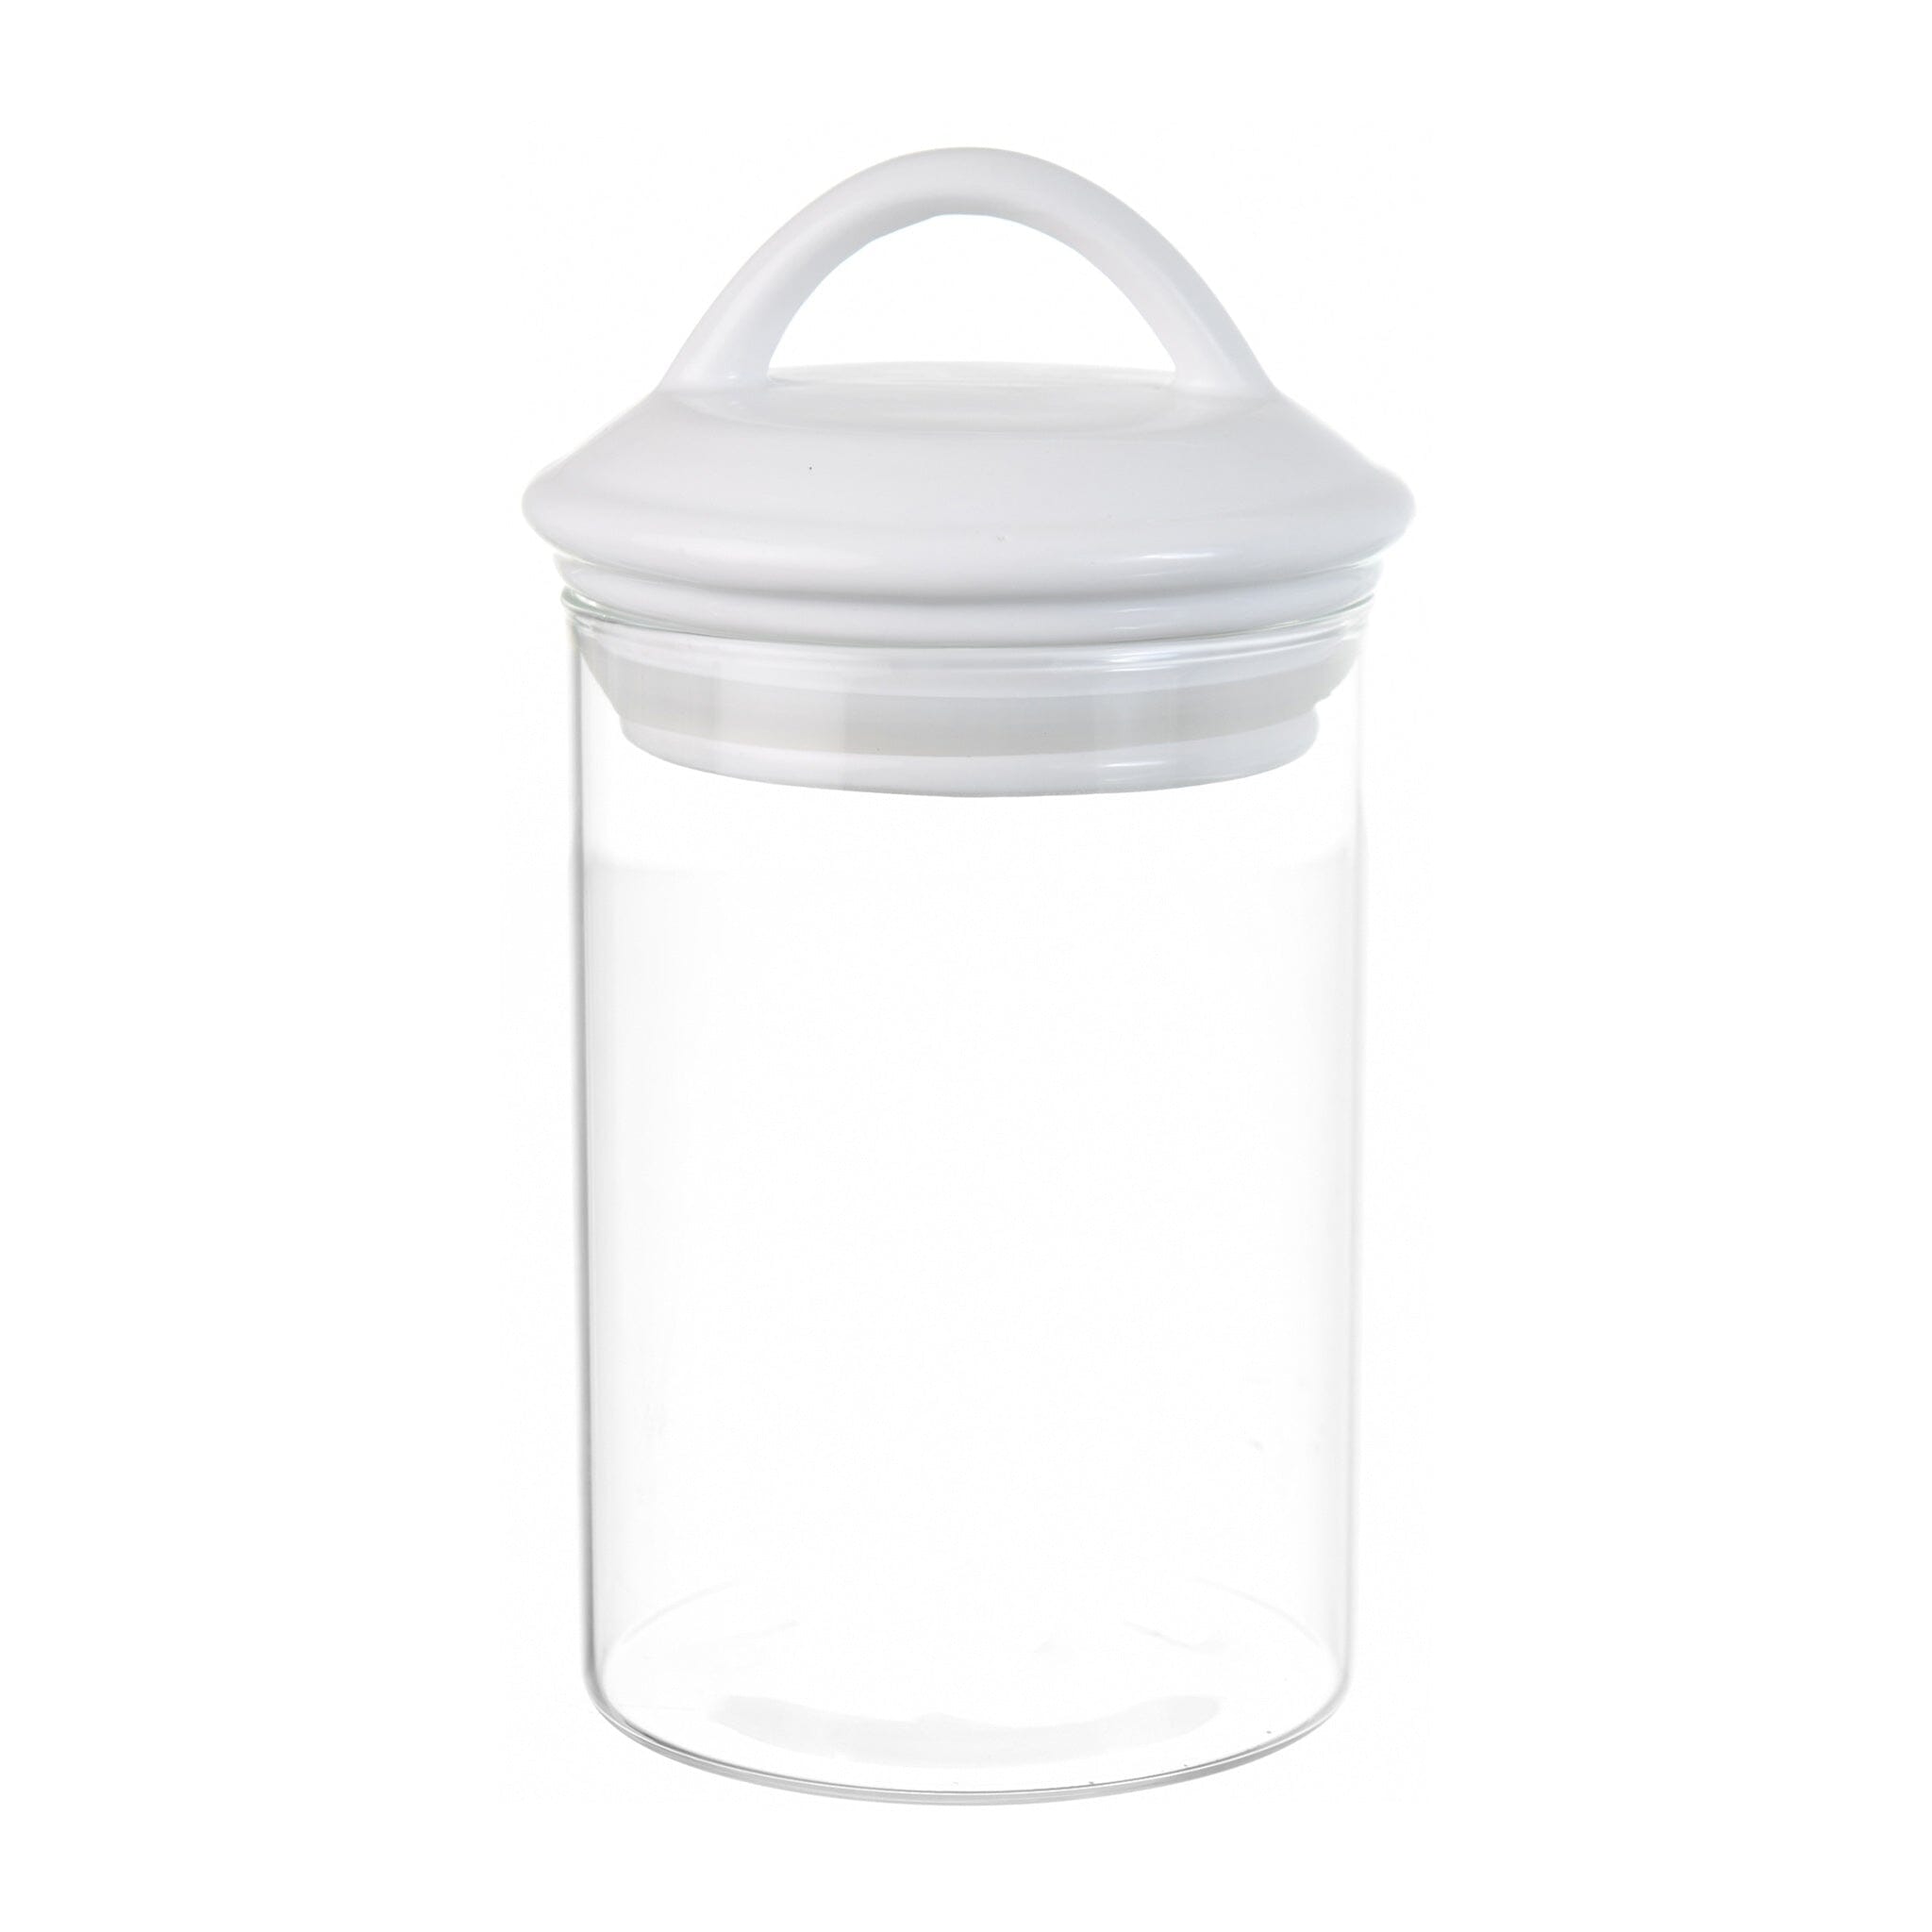 O'lala - Glass Jar with Silicone Cover - White - 10x14cm - 520008052